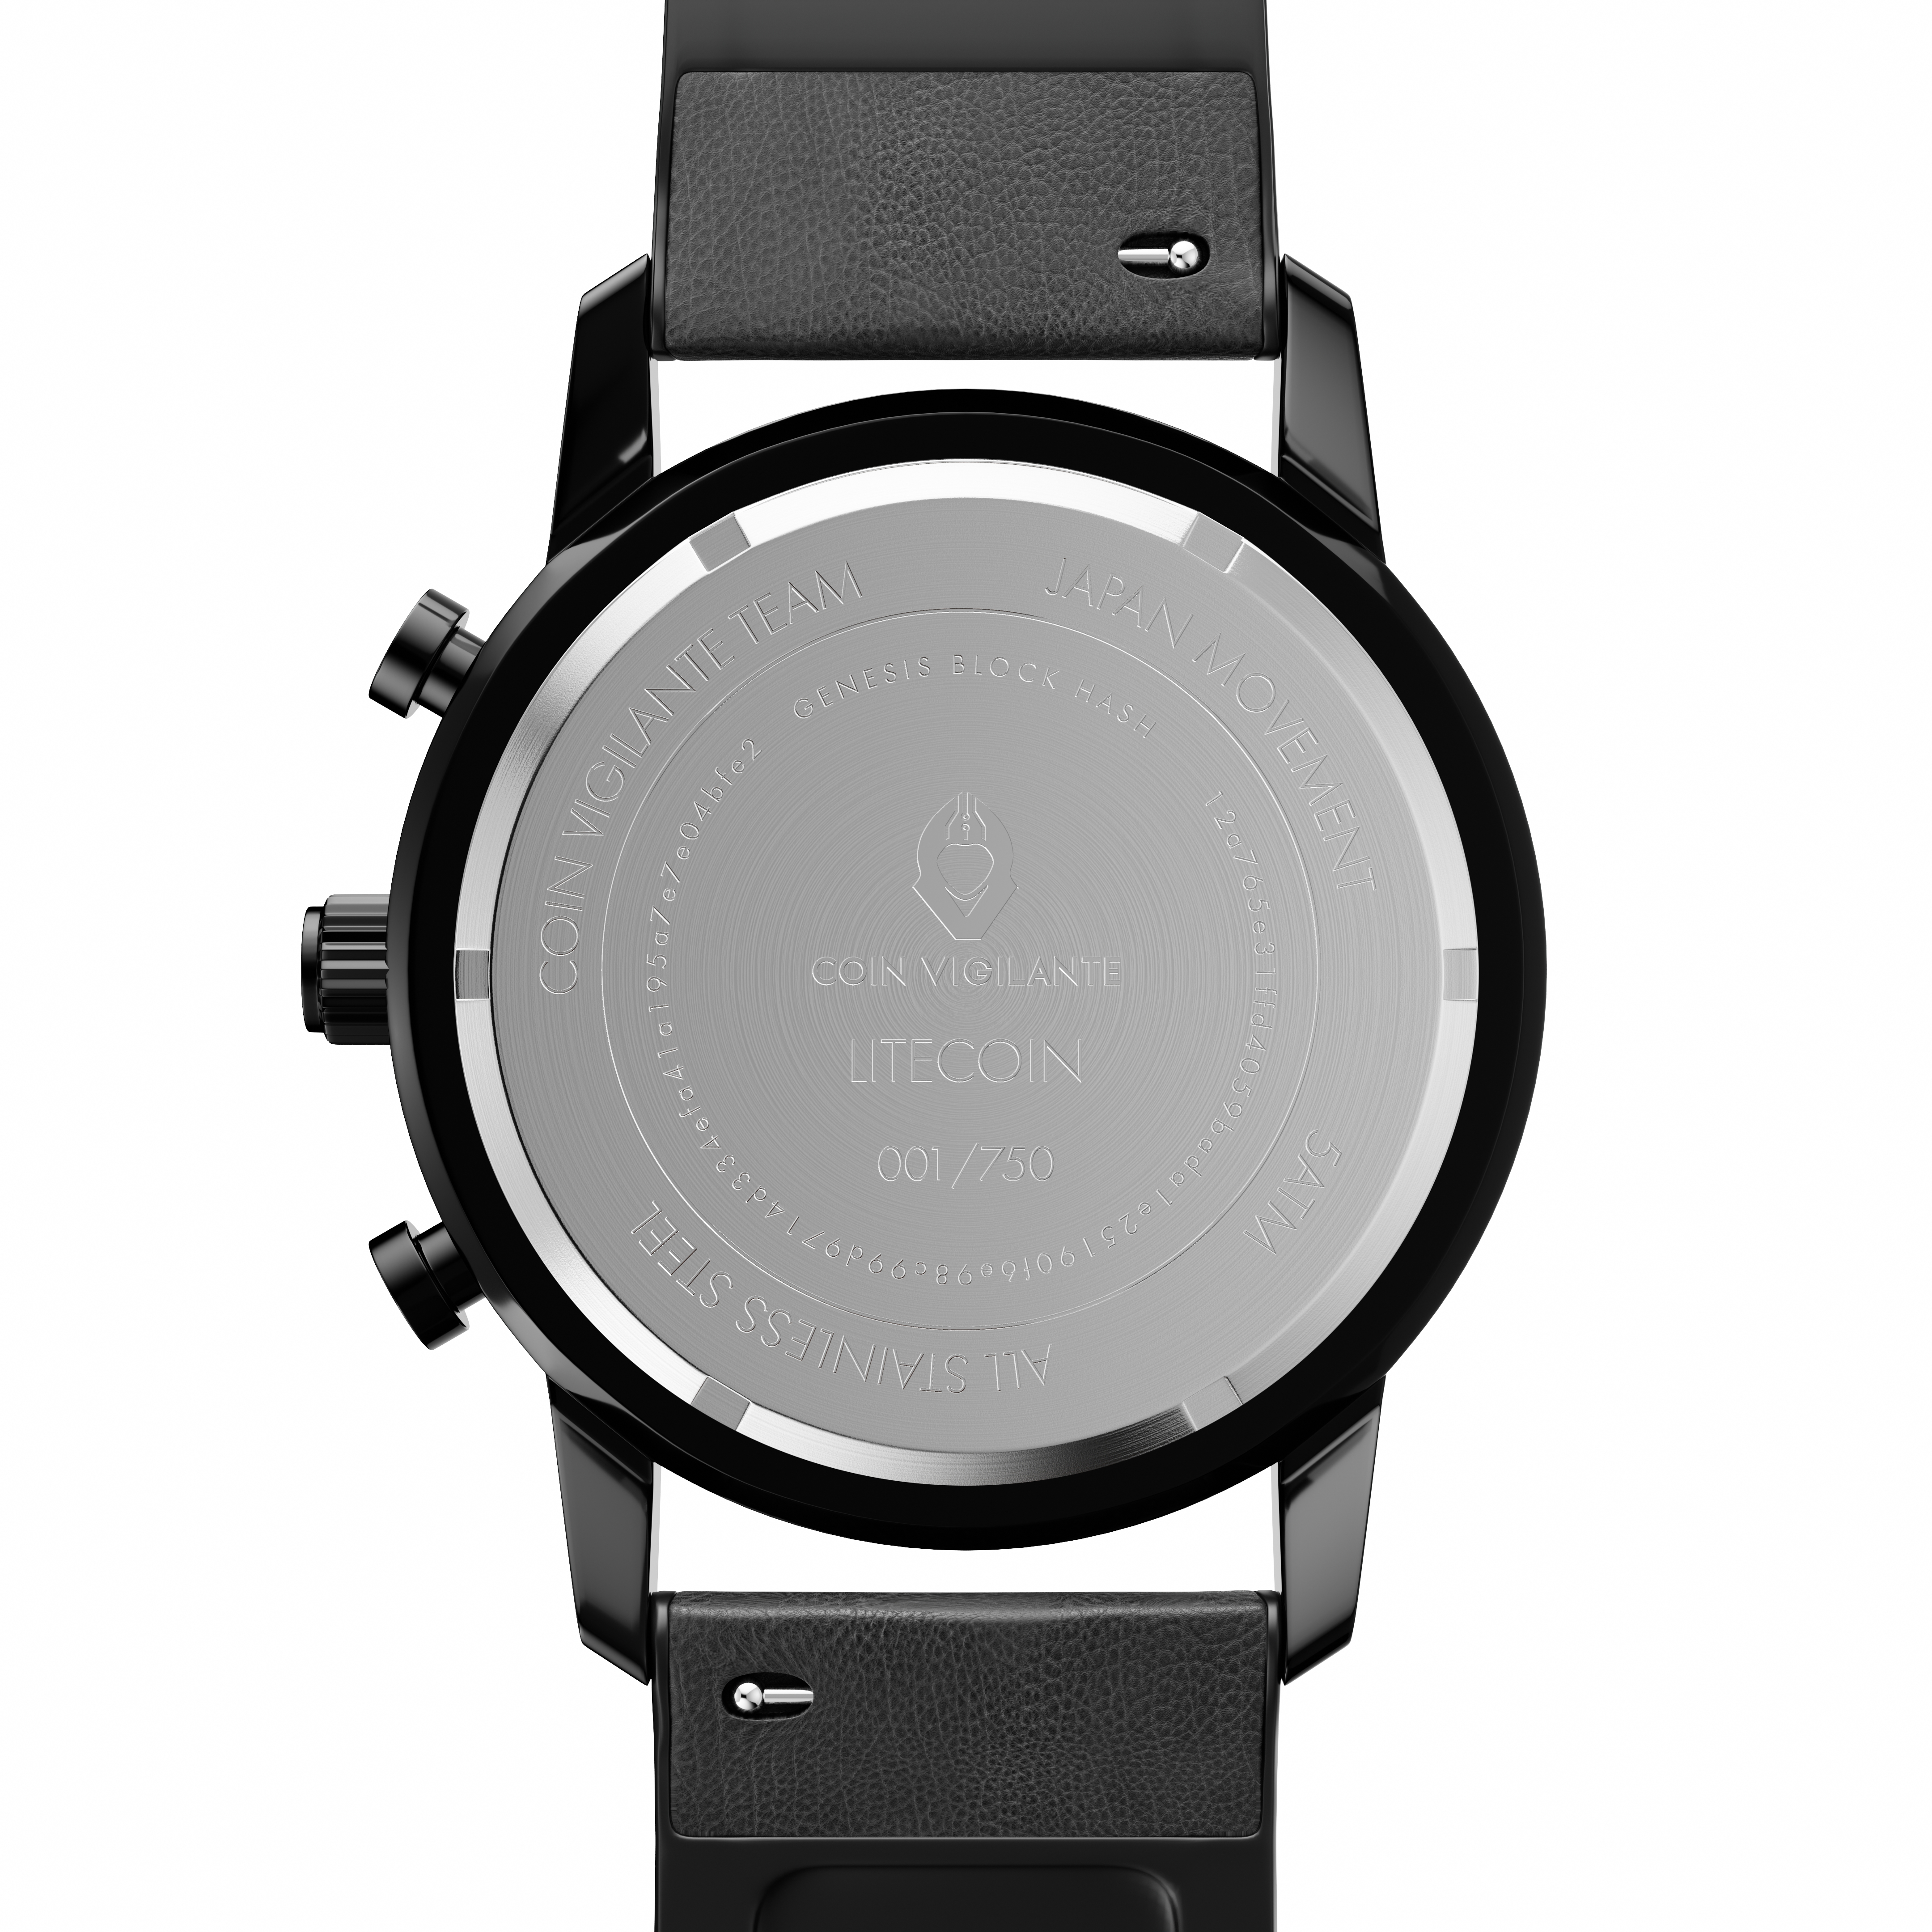 Litecoin Watch Model H - First Limited Edition (Only 750 in existence)